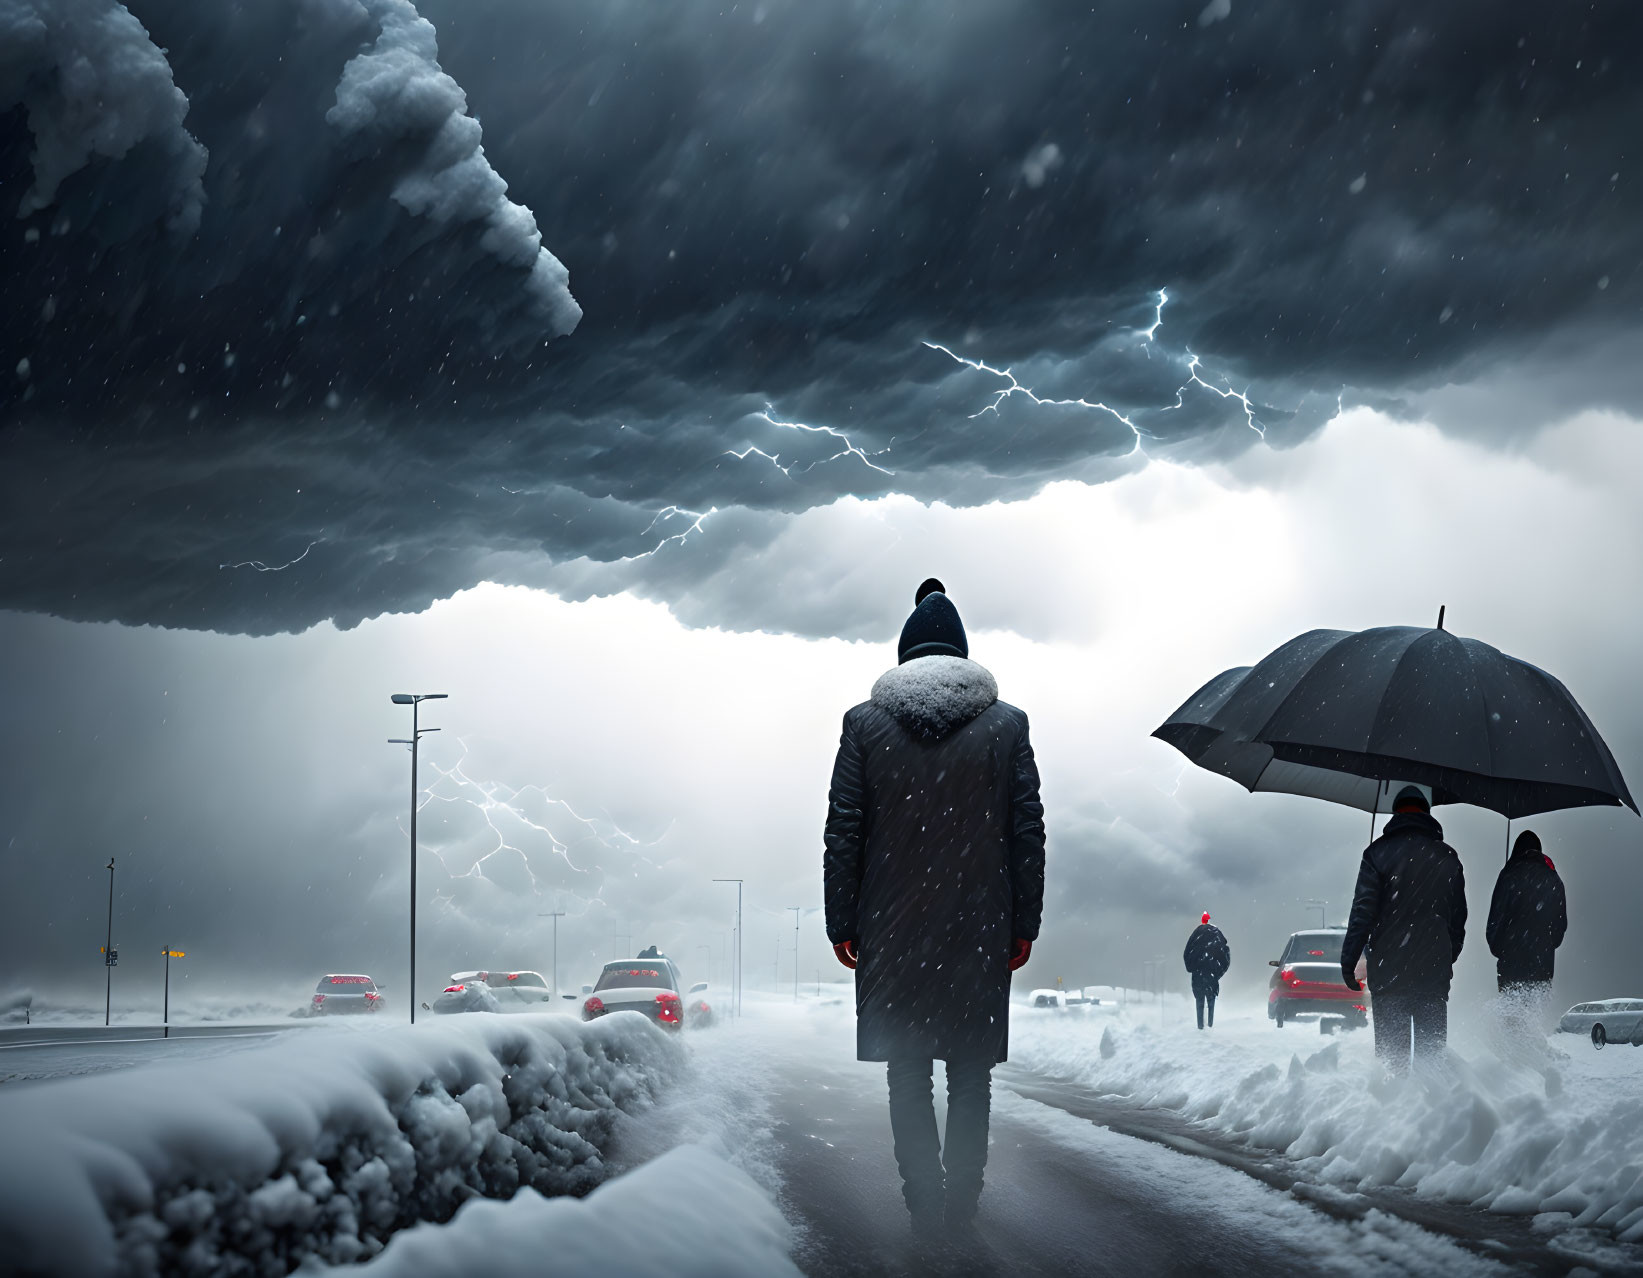 Person walking on snowy road with umbrella under stormy sky